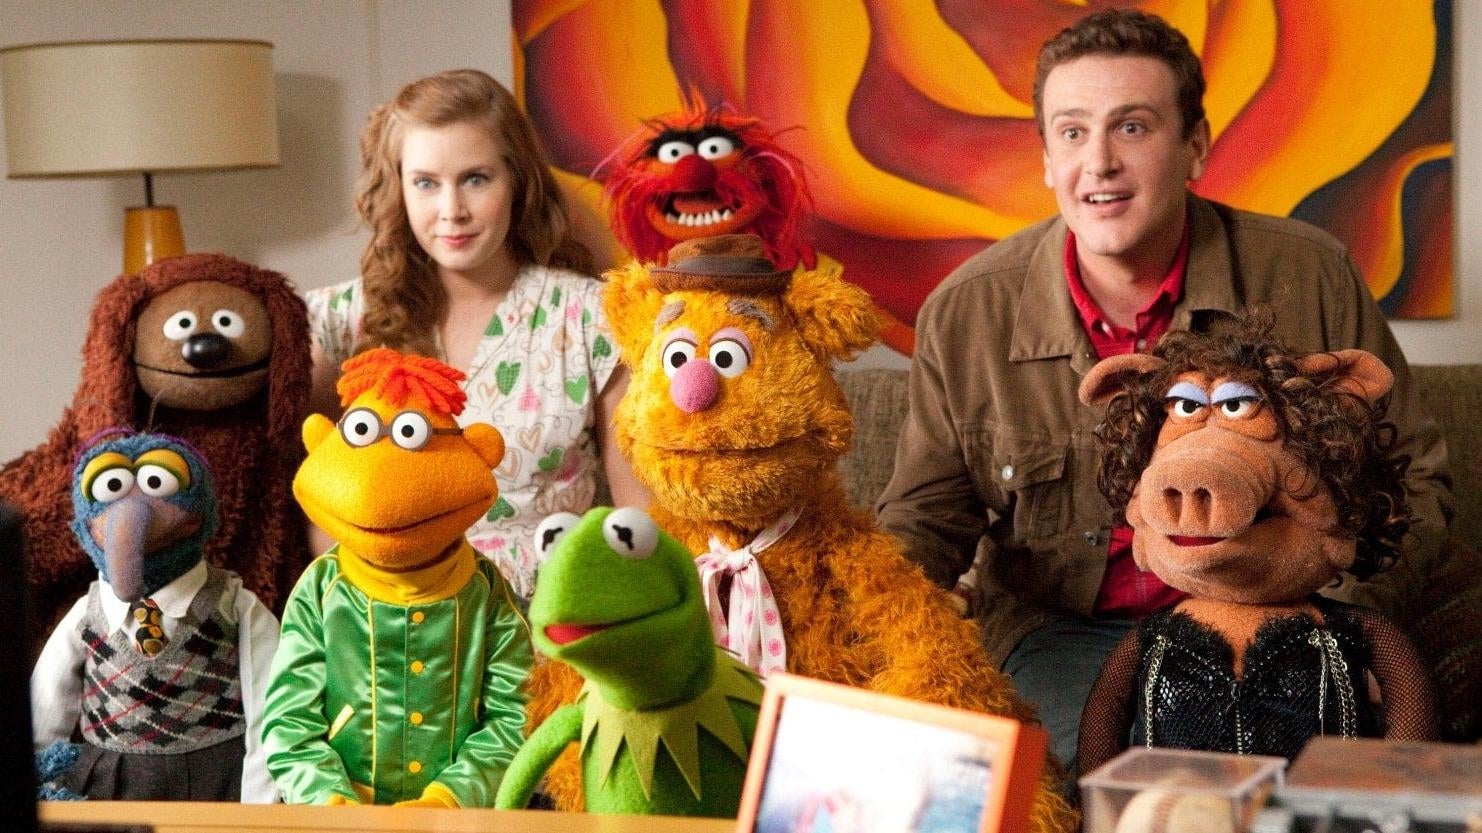 Amy Adams, Jason Segel, and the Muppets in The Muppets. (Image: Disney)